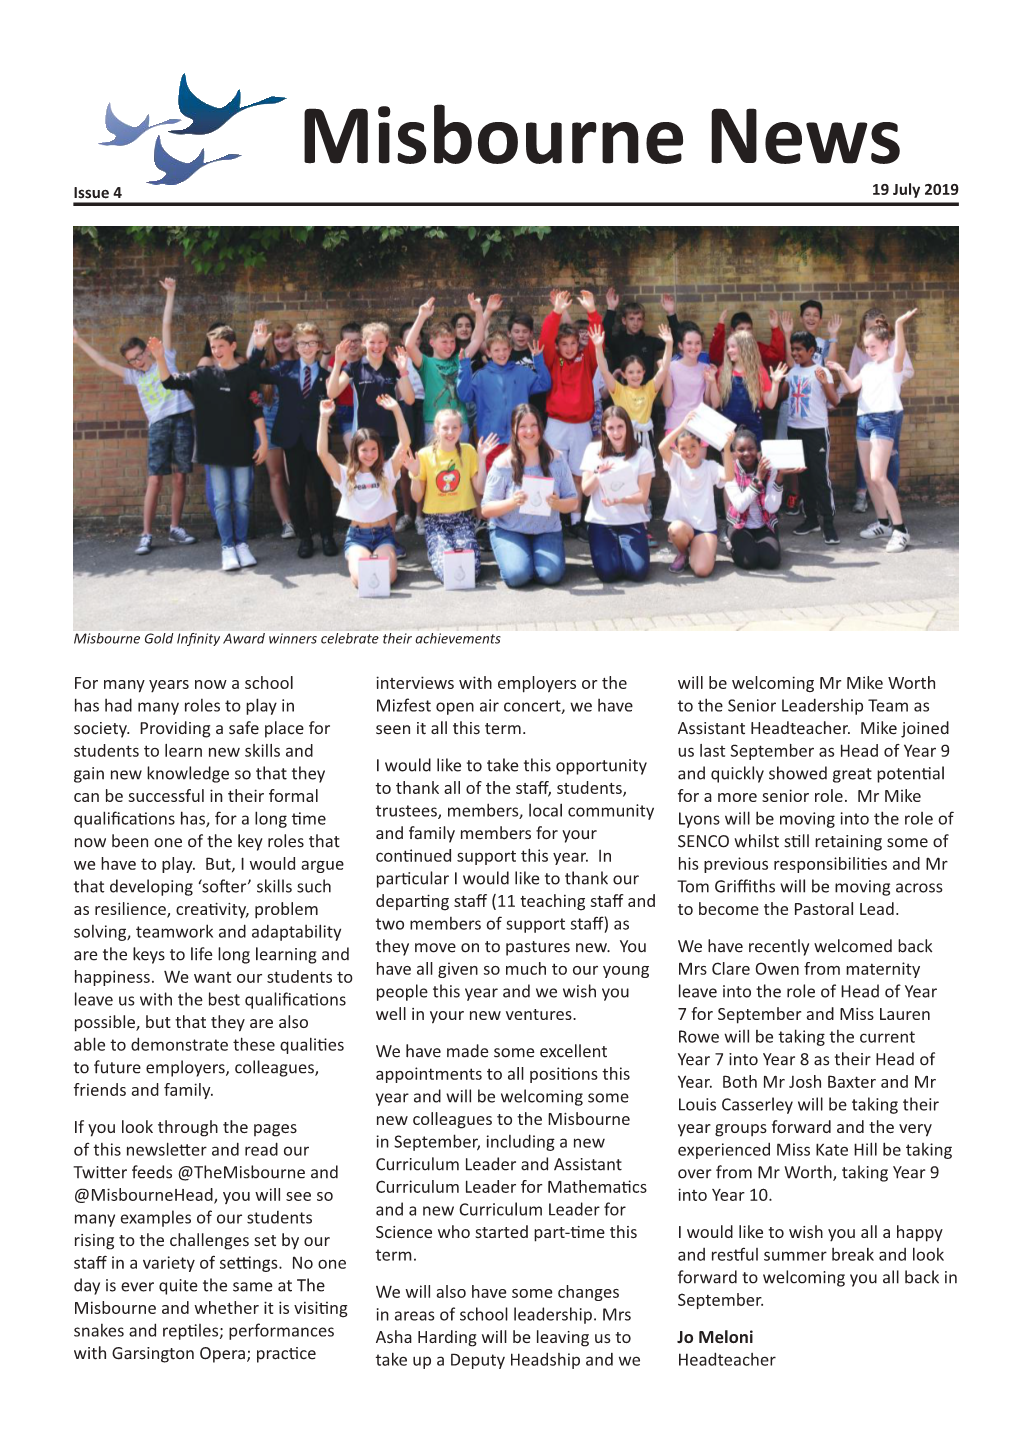 Misbourne News Issue 4 19 July 2019